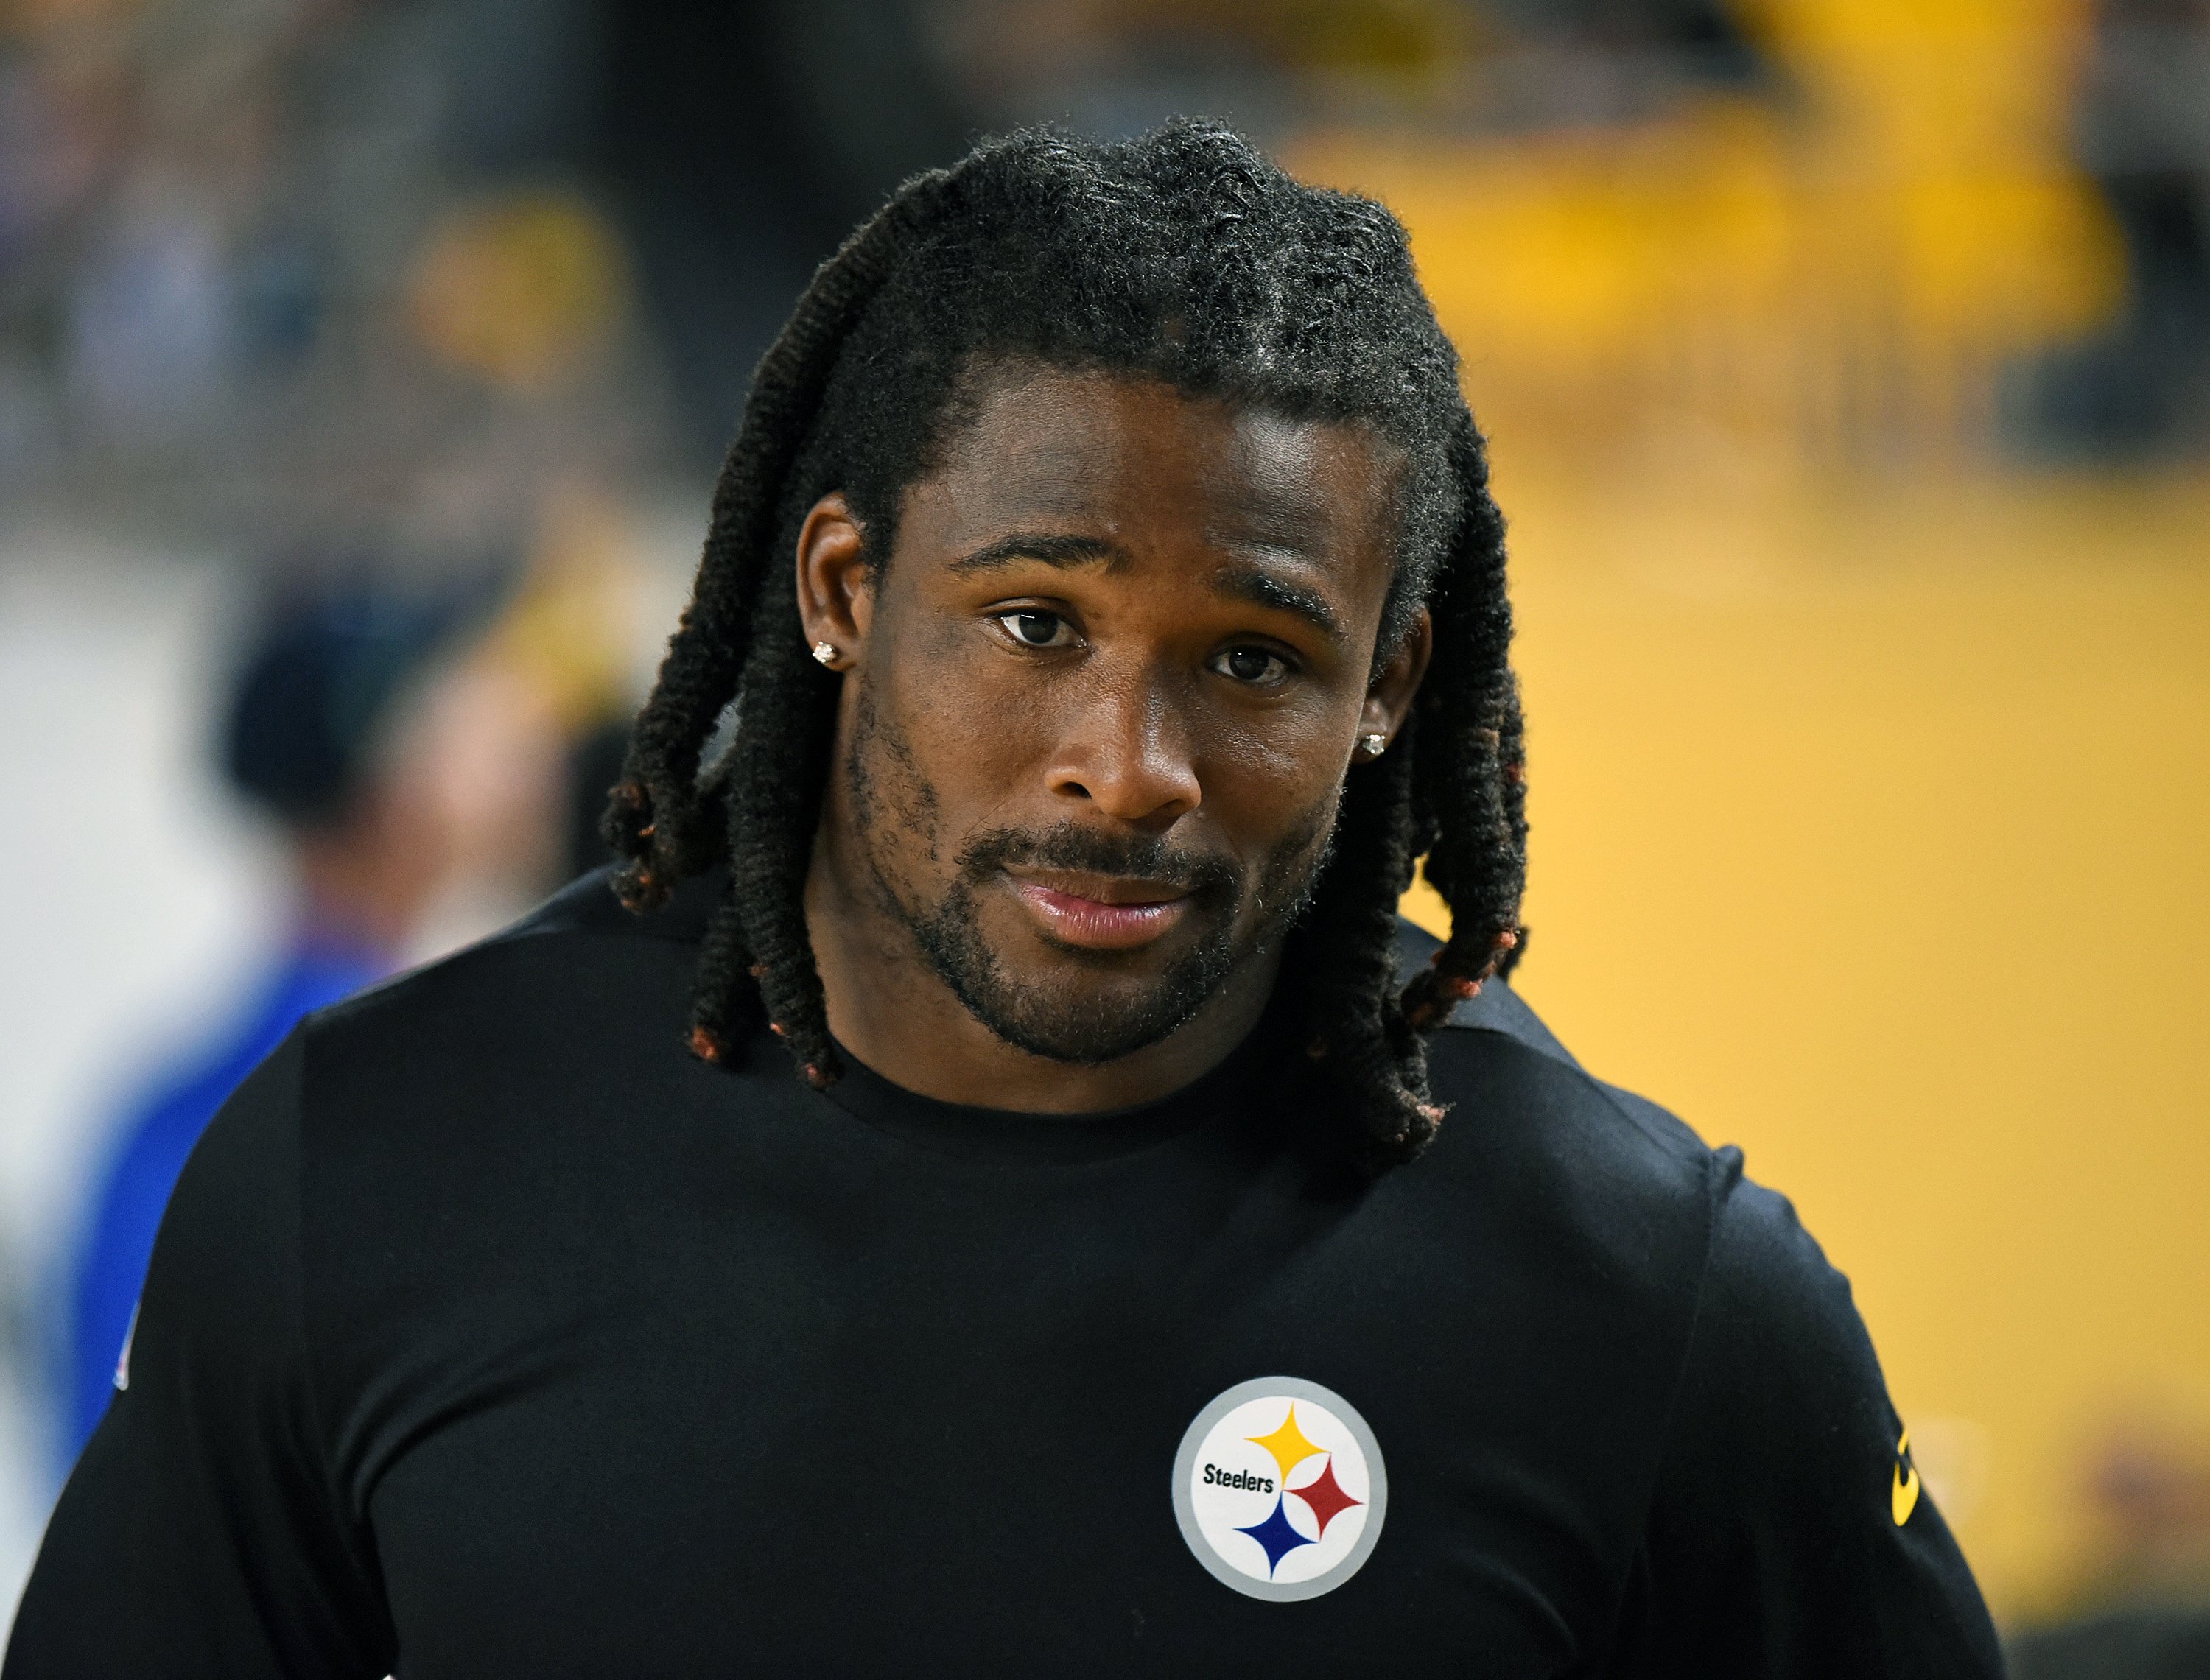 DeAngelo Williams during a National Football League preseason game in 2016. | Source: Getty Images